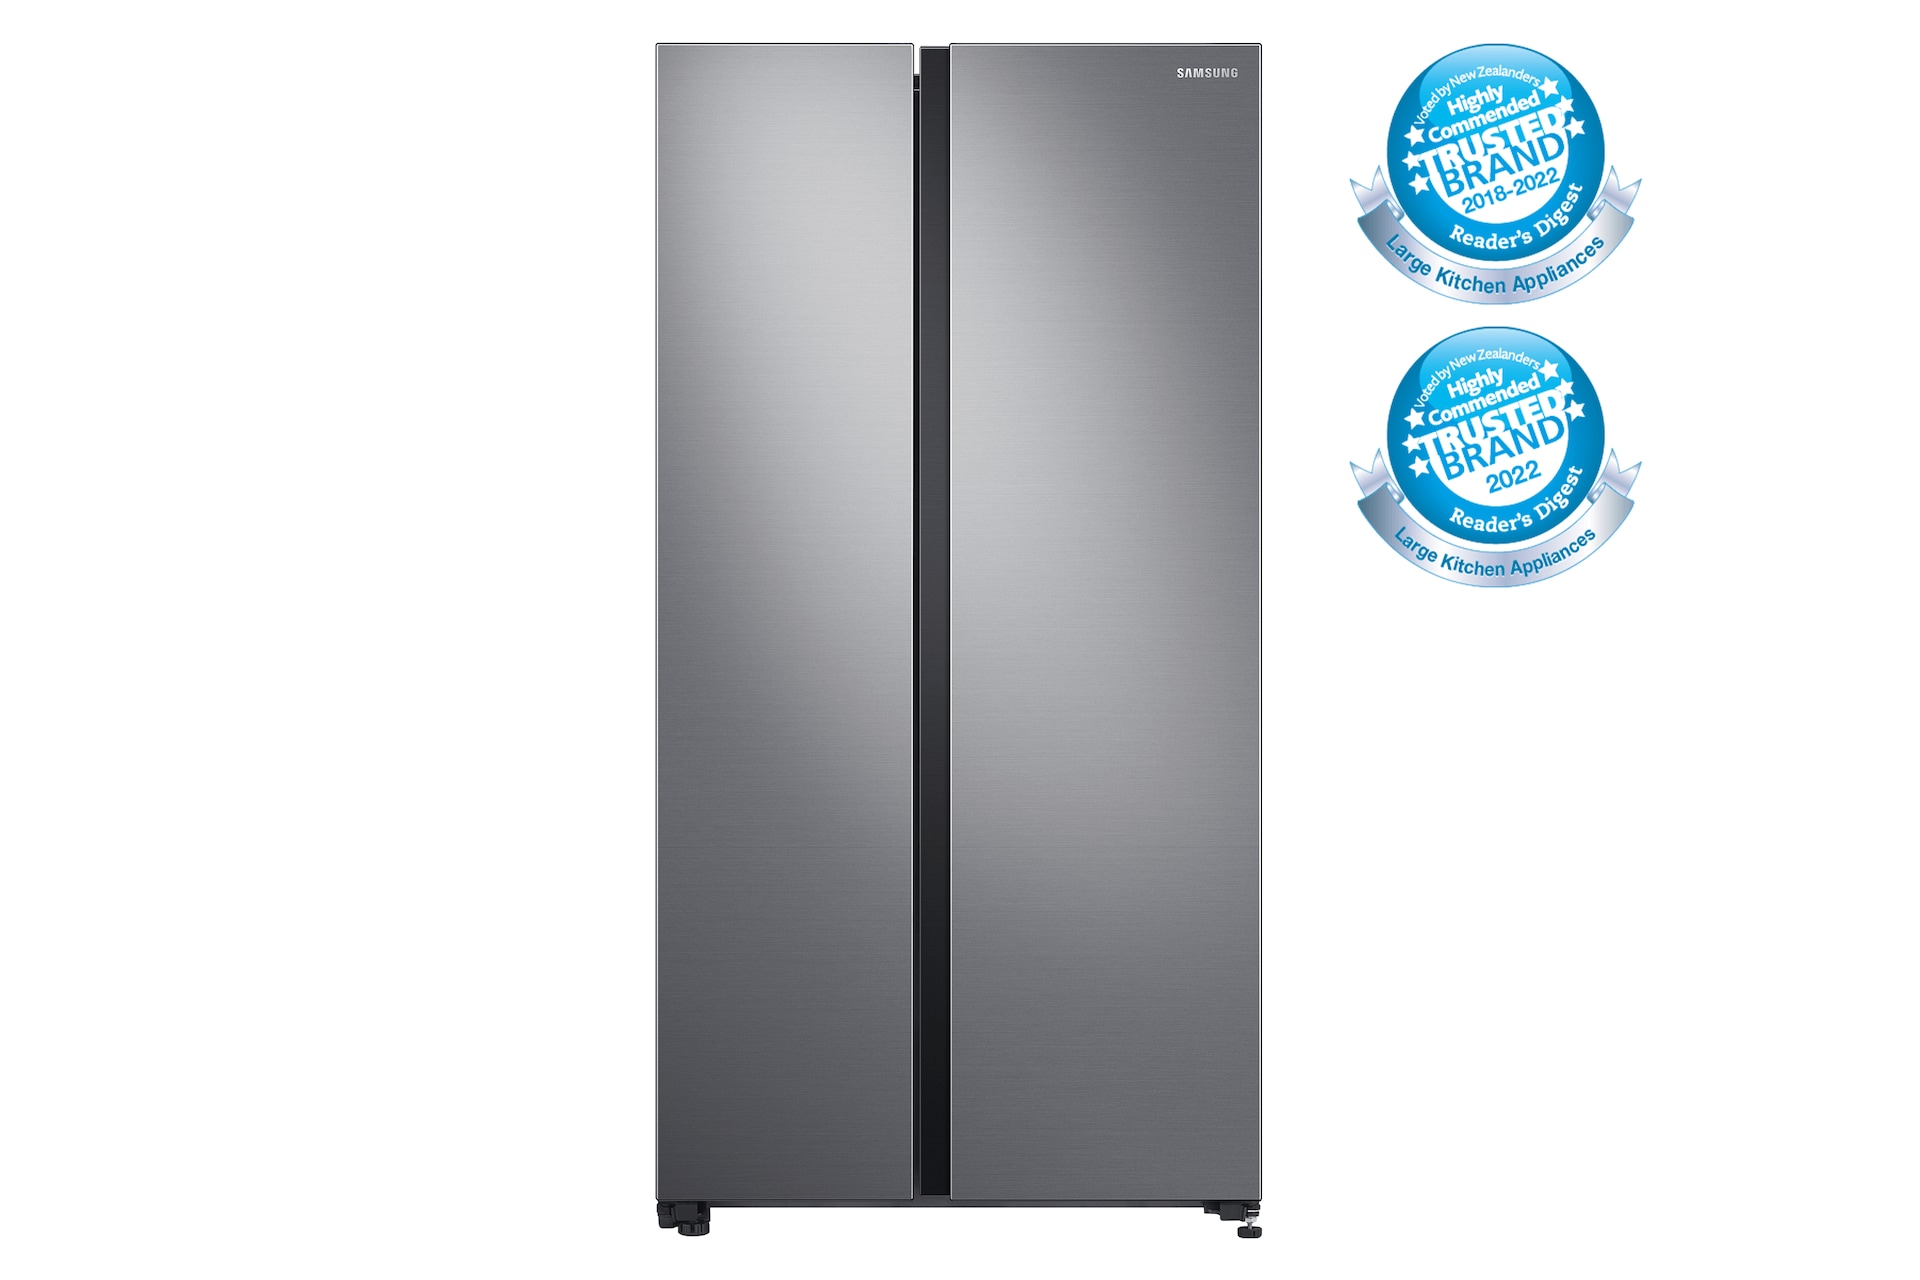 Front view of the Samsung 655L Side By Side Fridge (SRS694NLS) in Silver colour.